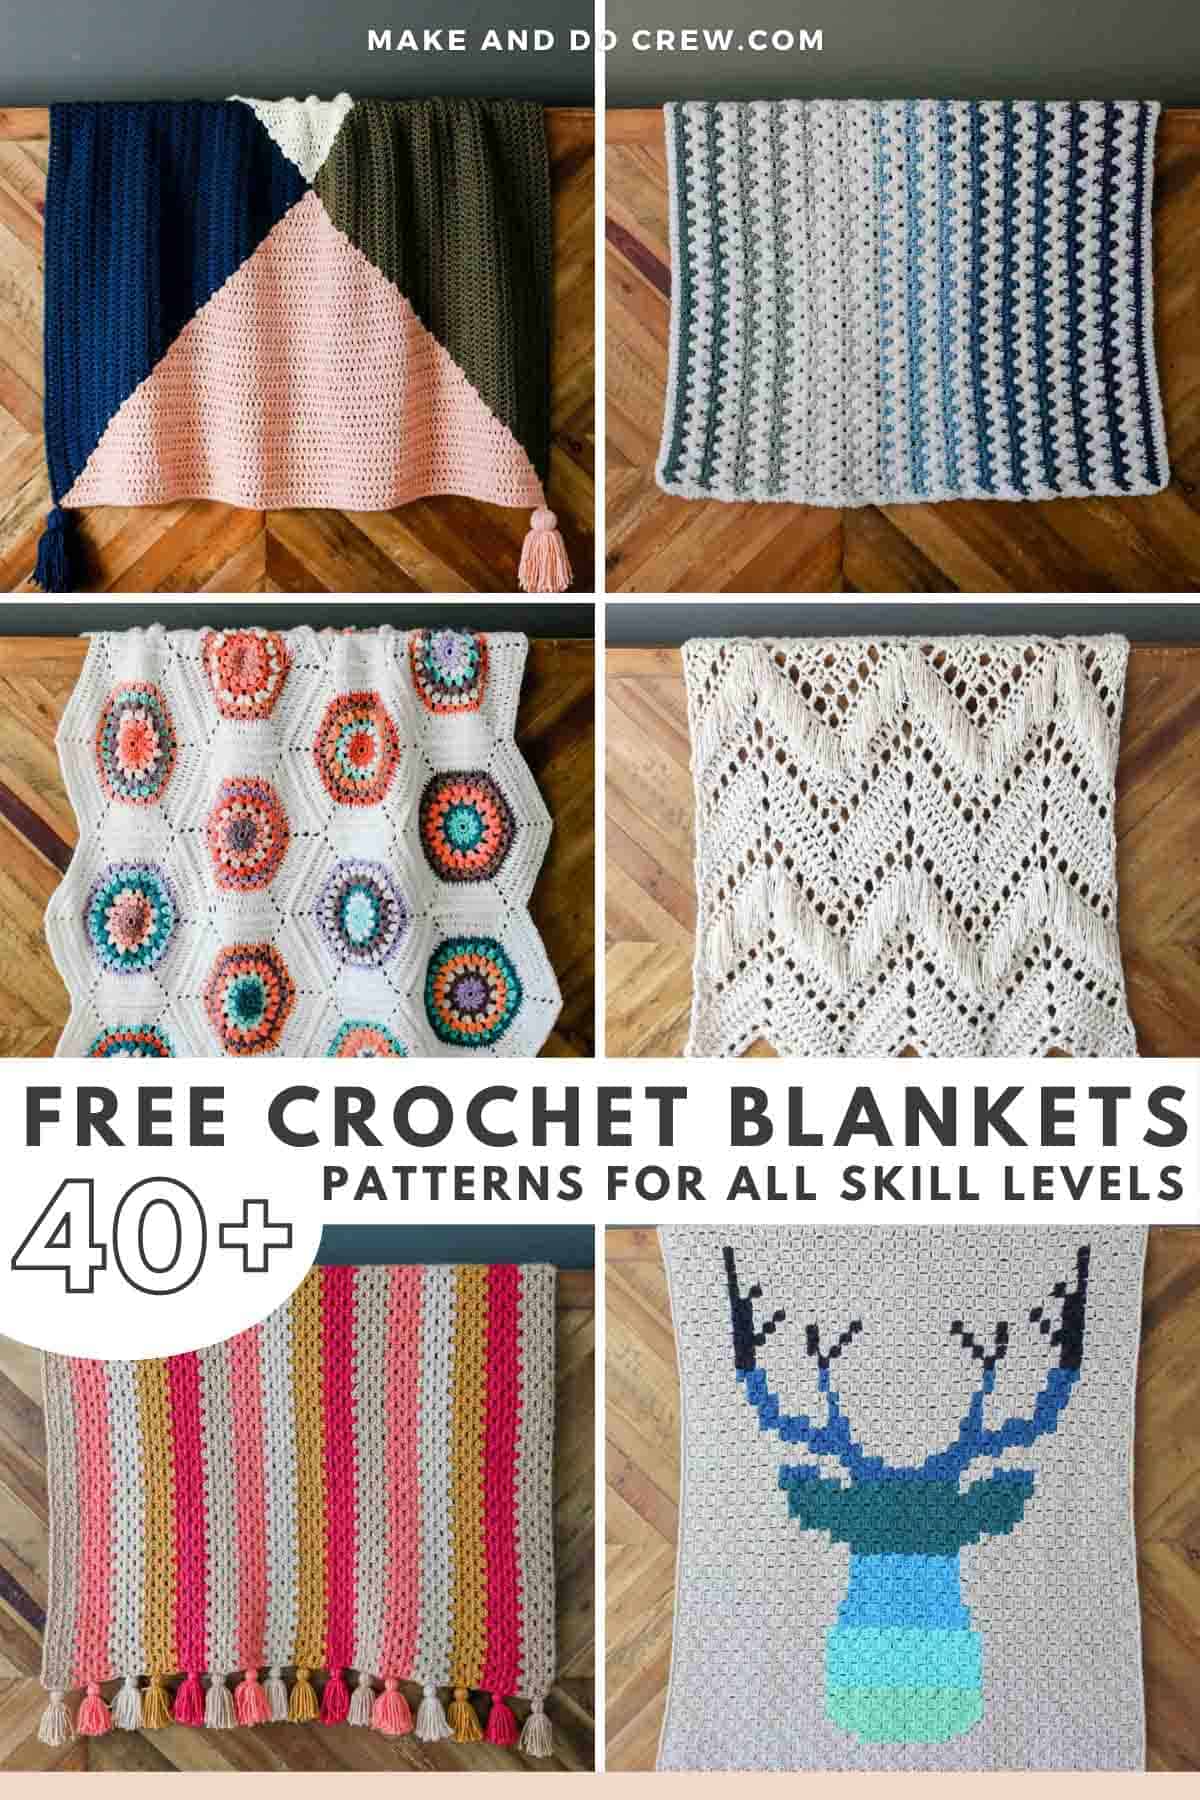 A collection of 6 crochet blanket patterns for all skill levels.